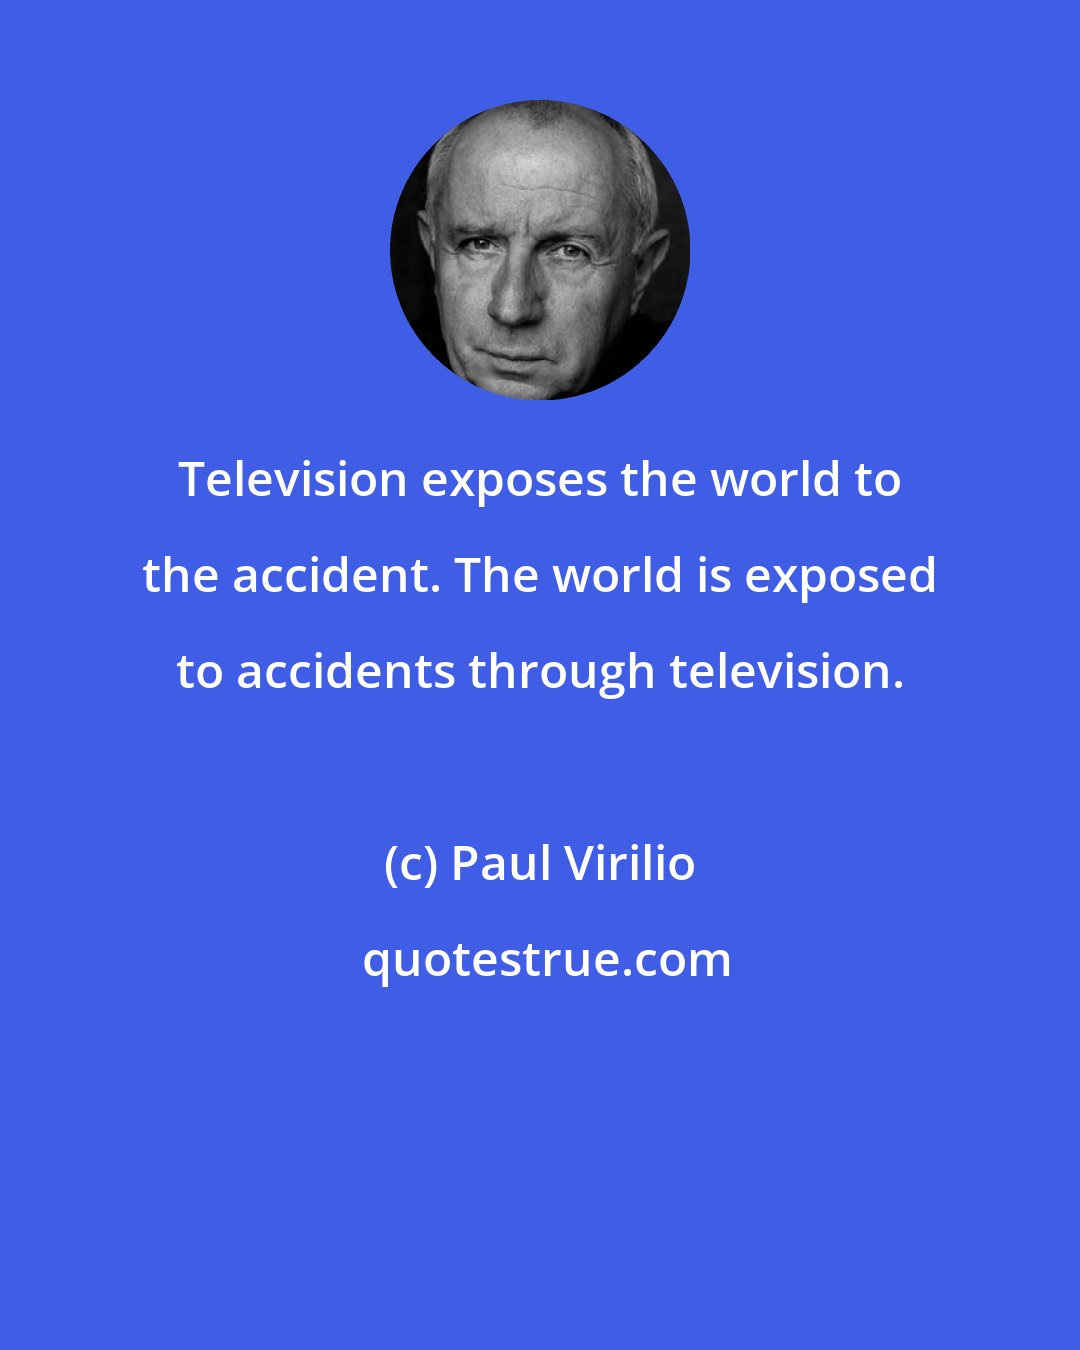 Paul Virilio: Television exposes the world to the accident. The world is exposed to accidents through television.